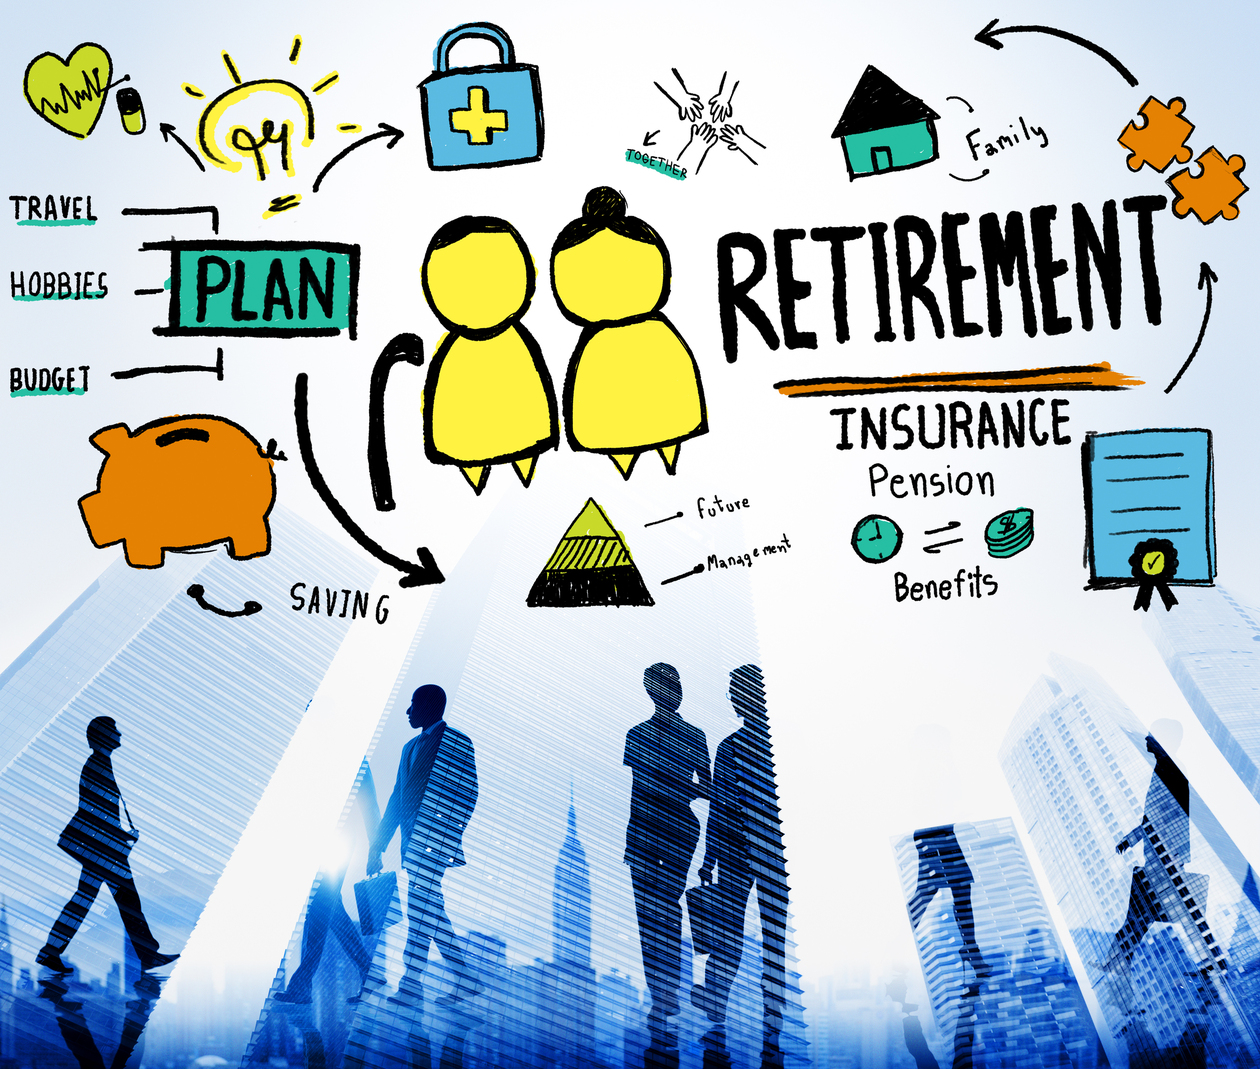 How confident are you about your retirement?